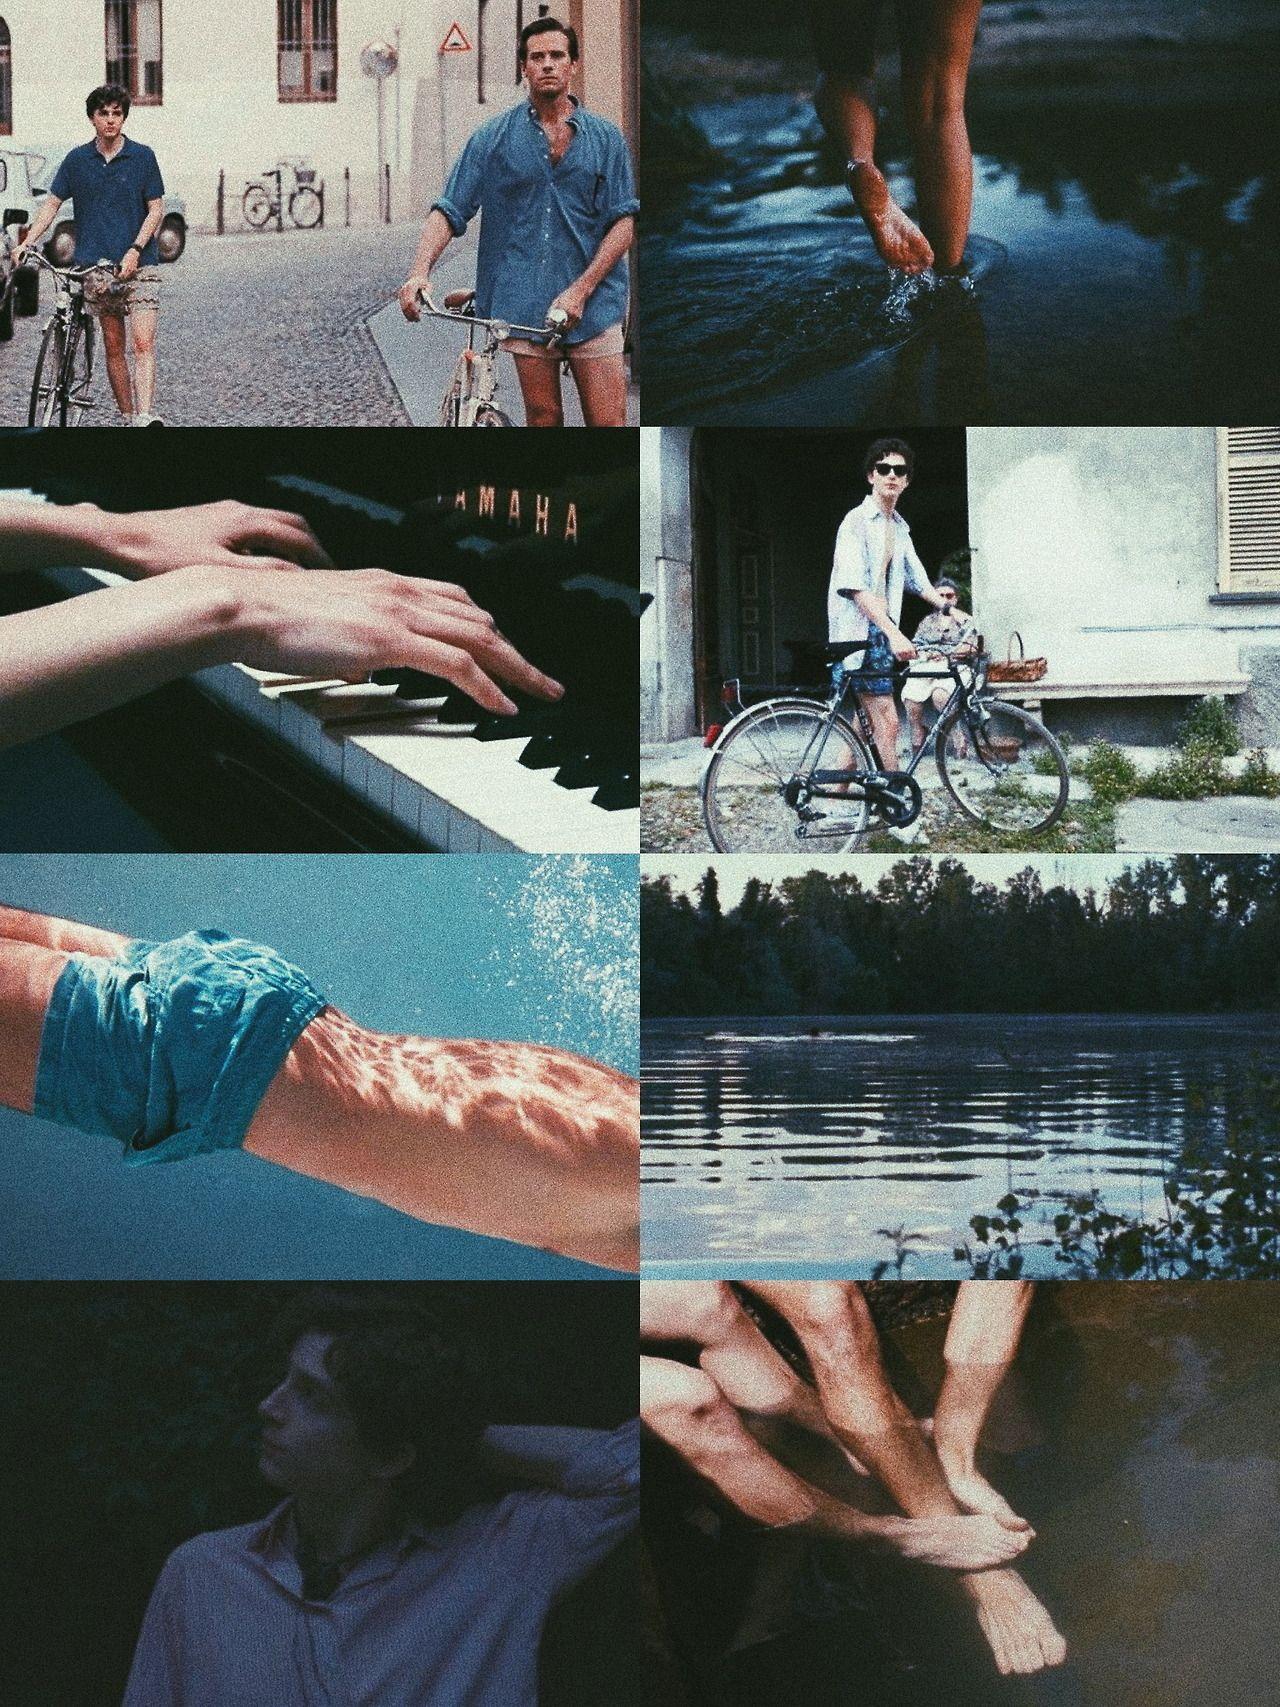 call me by your name. Call me, Names, Cinematography